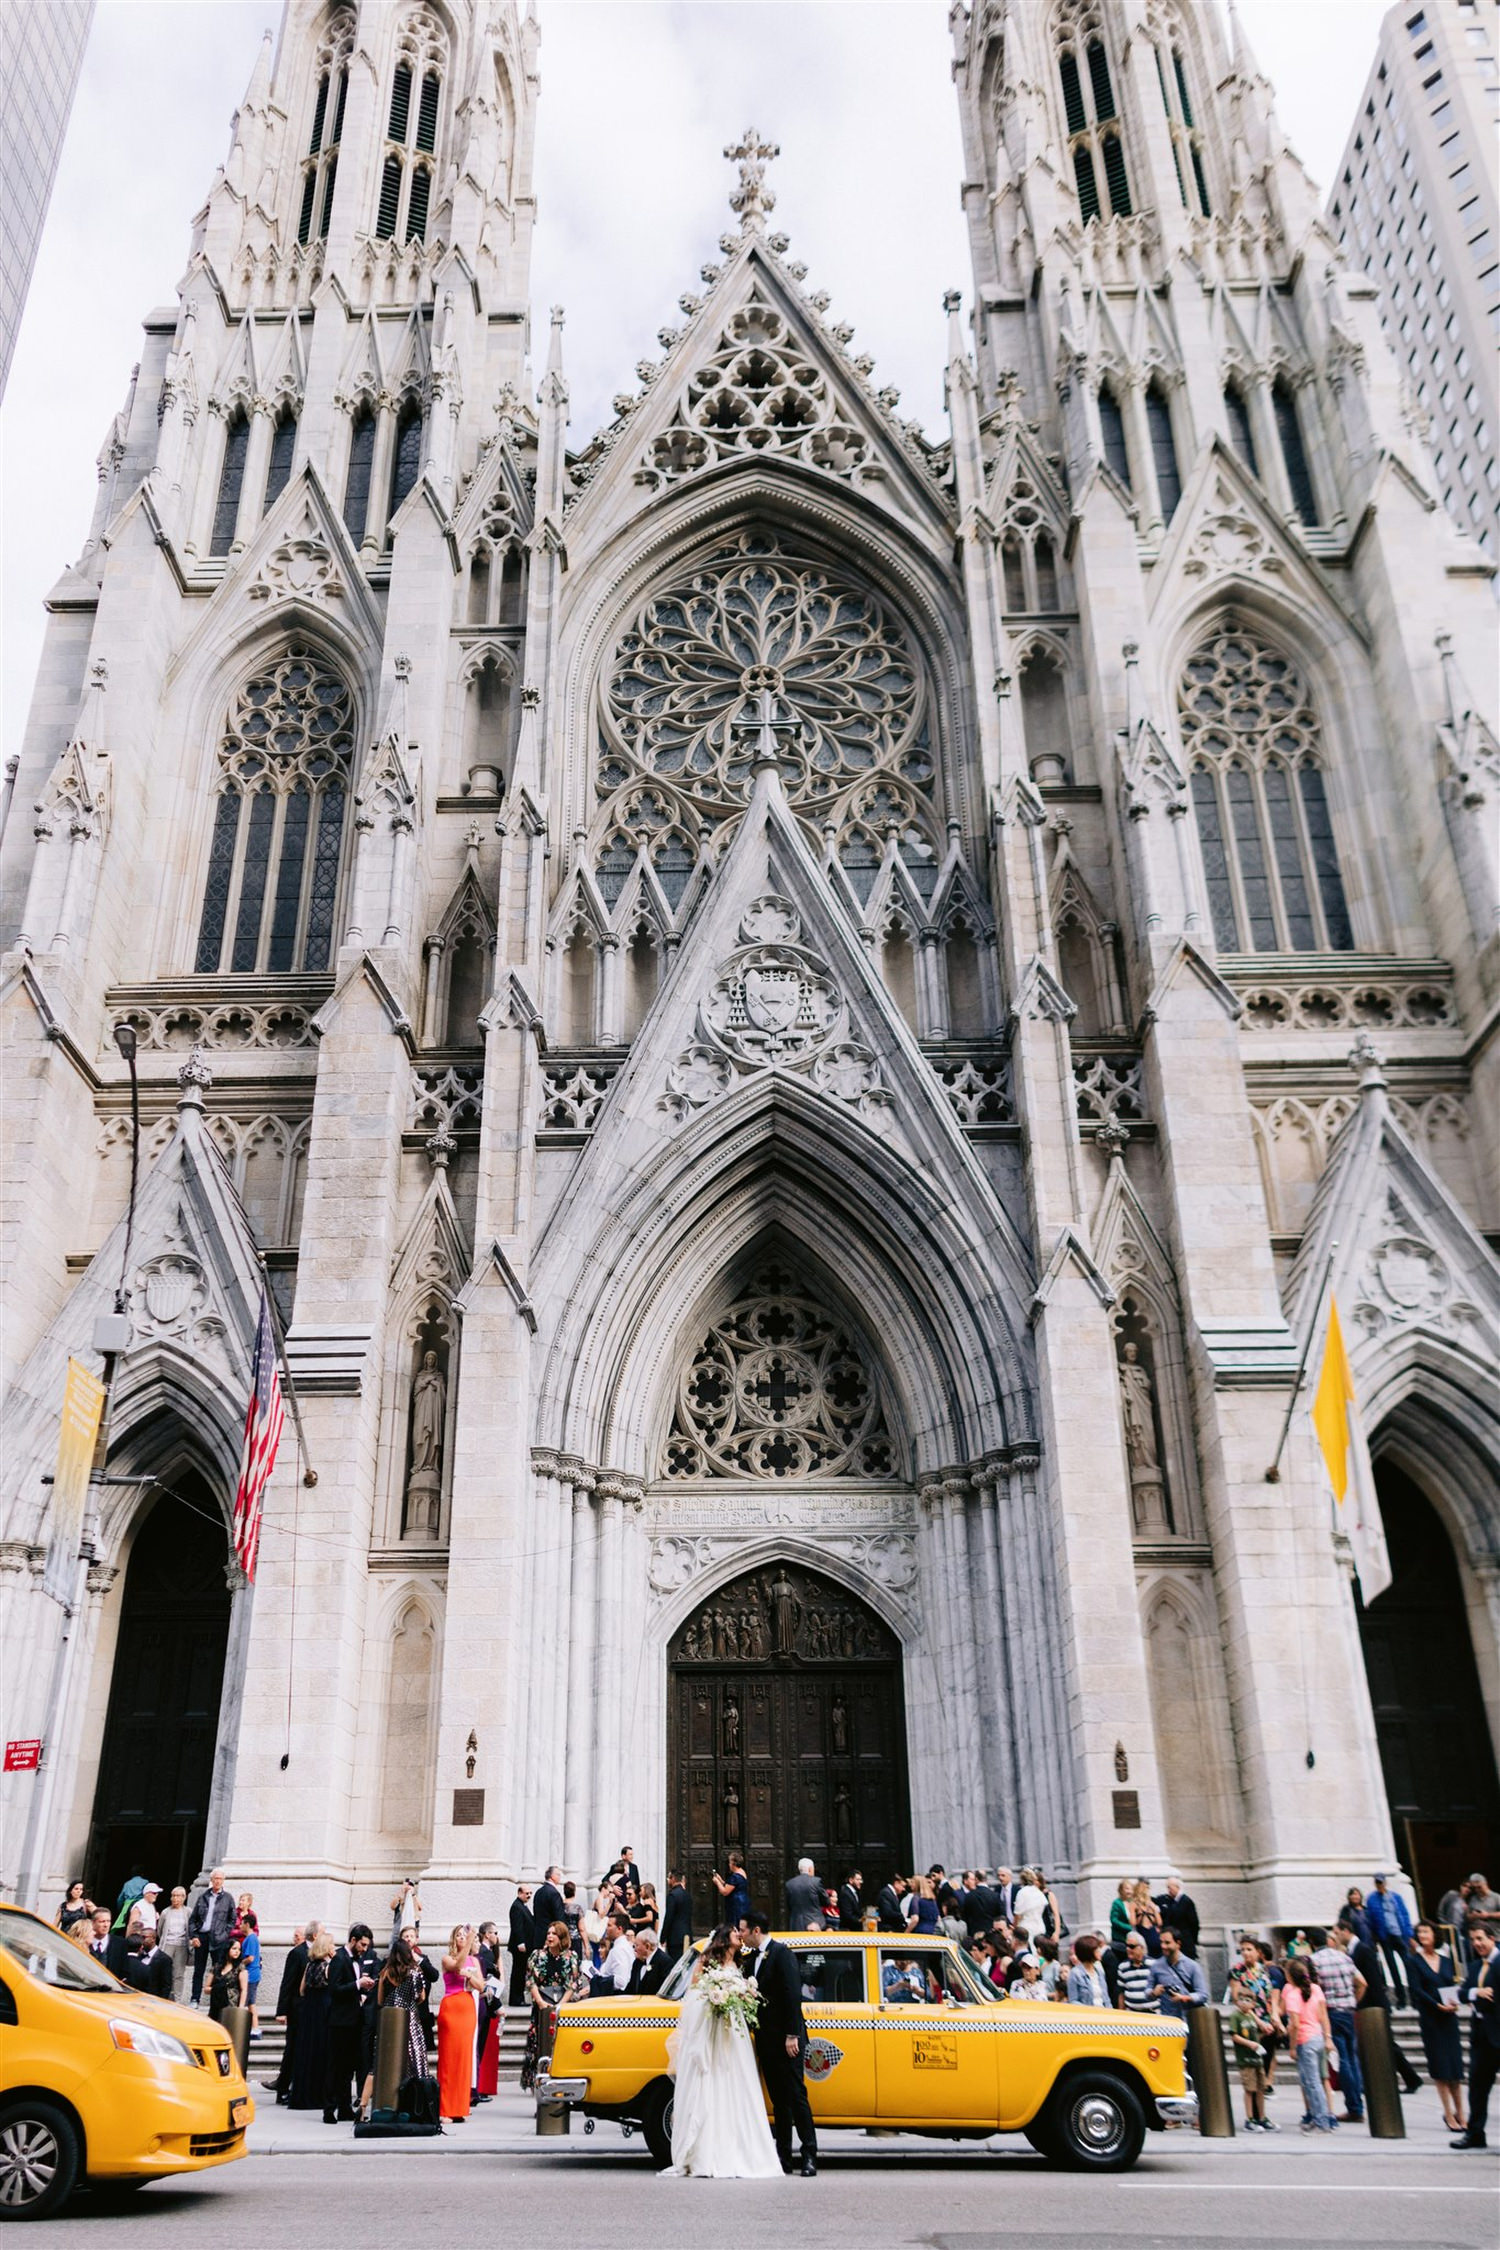 st. patricks cathedral, jw marriott essex house, bridal, wedding, classic new york wedding,  bride and groom share a kiss in front of a huge church in Manhattan nyc on 5th ave, fifth avenue, film cars New York, checker cab, Manhattan wedding